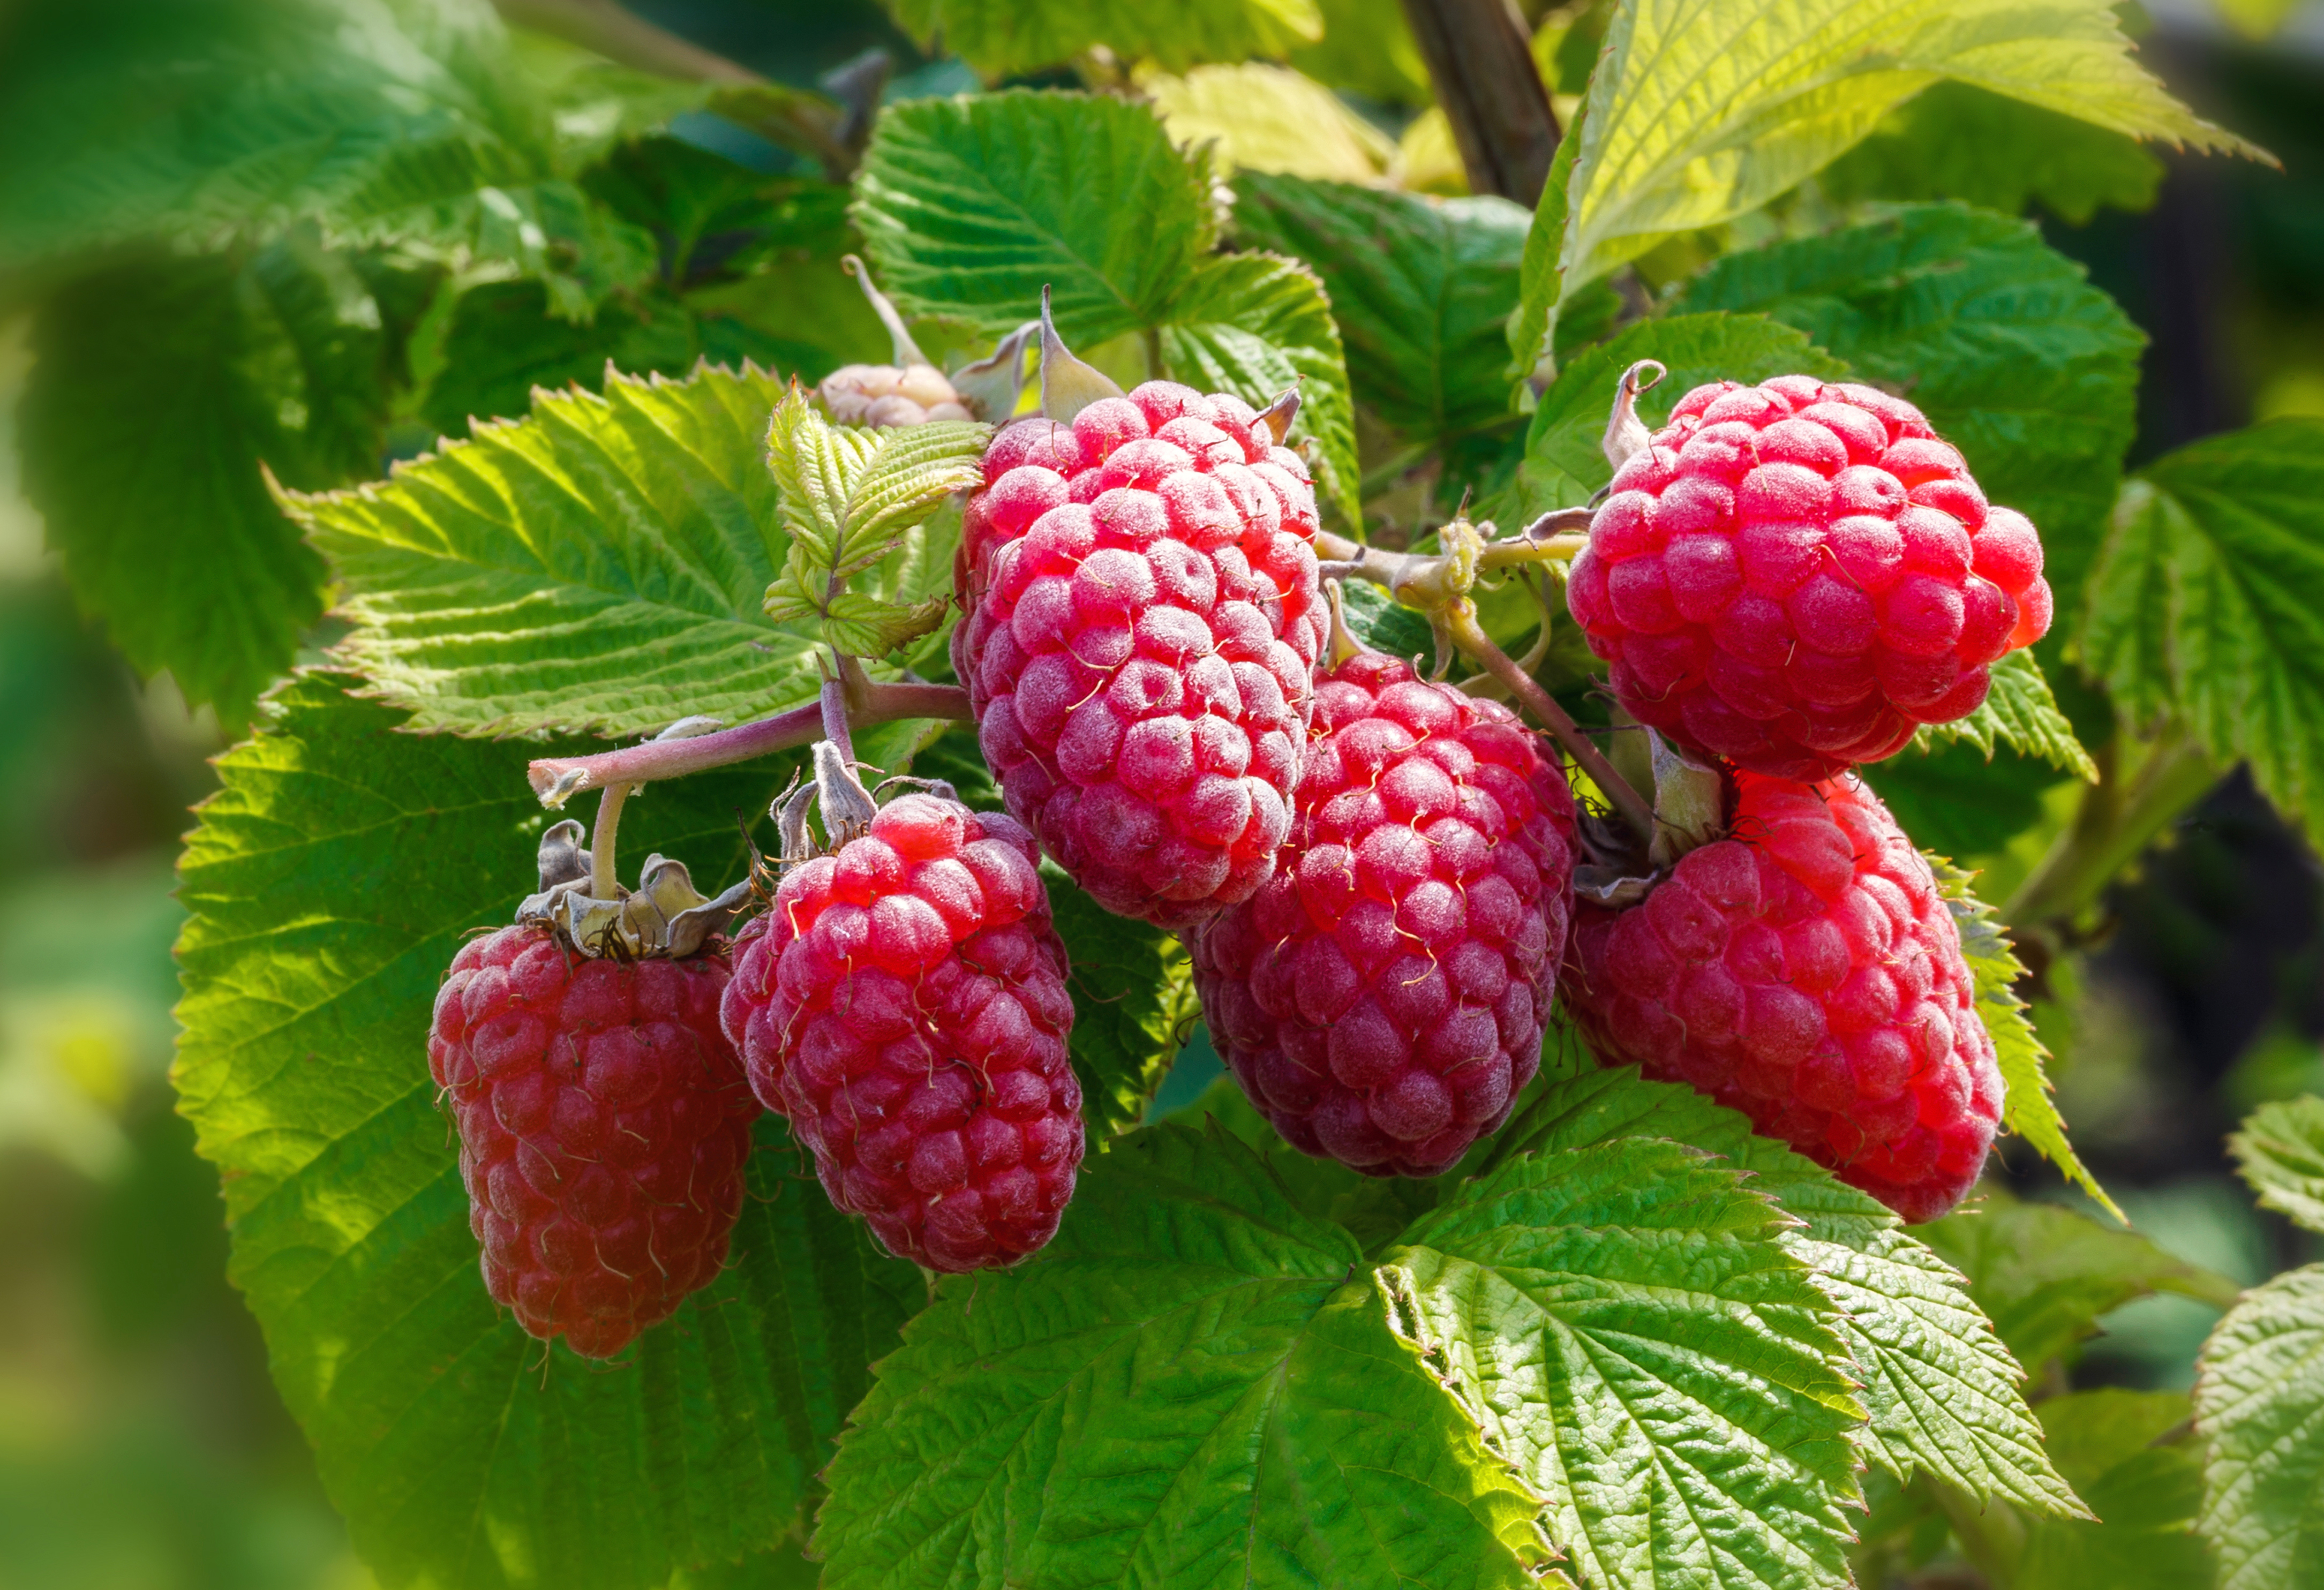 How to Plant and Grow Raspberries